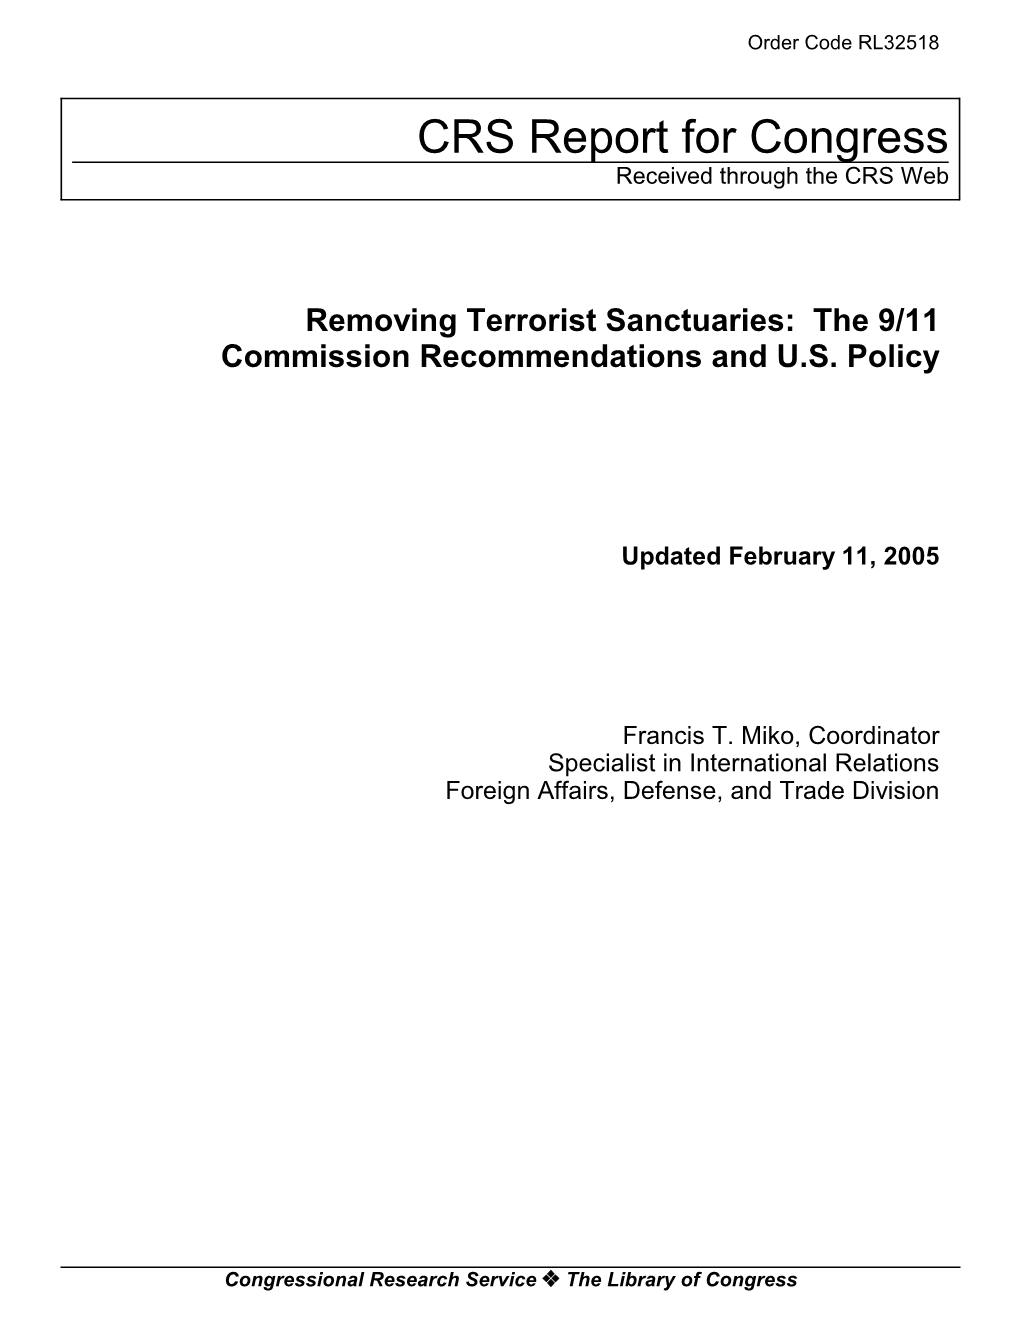 Removing Terrorist Sanctuaries: the 9/11 Commission Recommendations and U.S